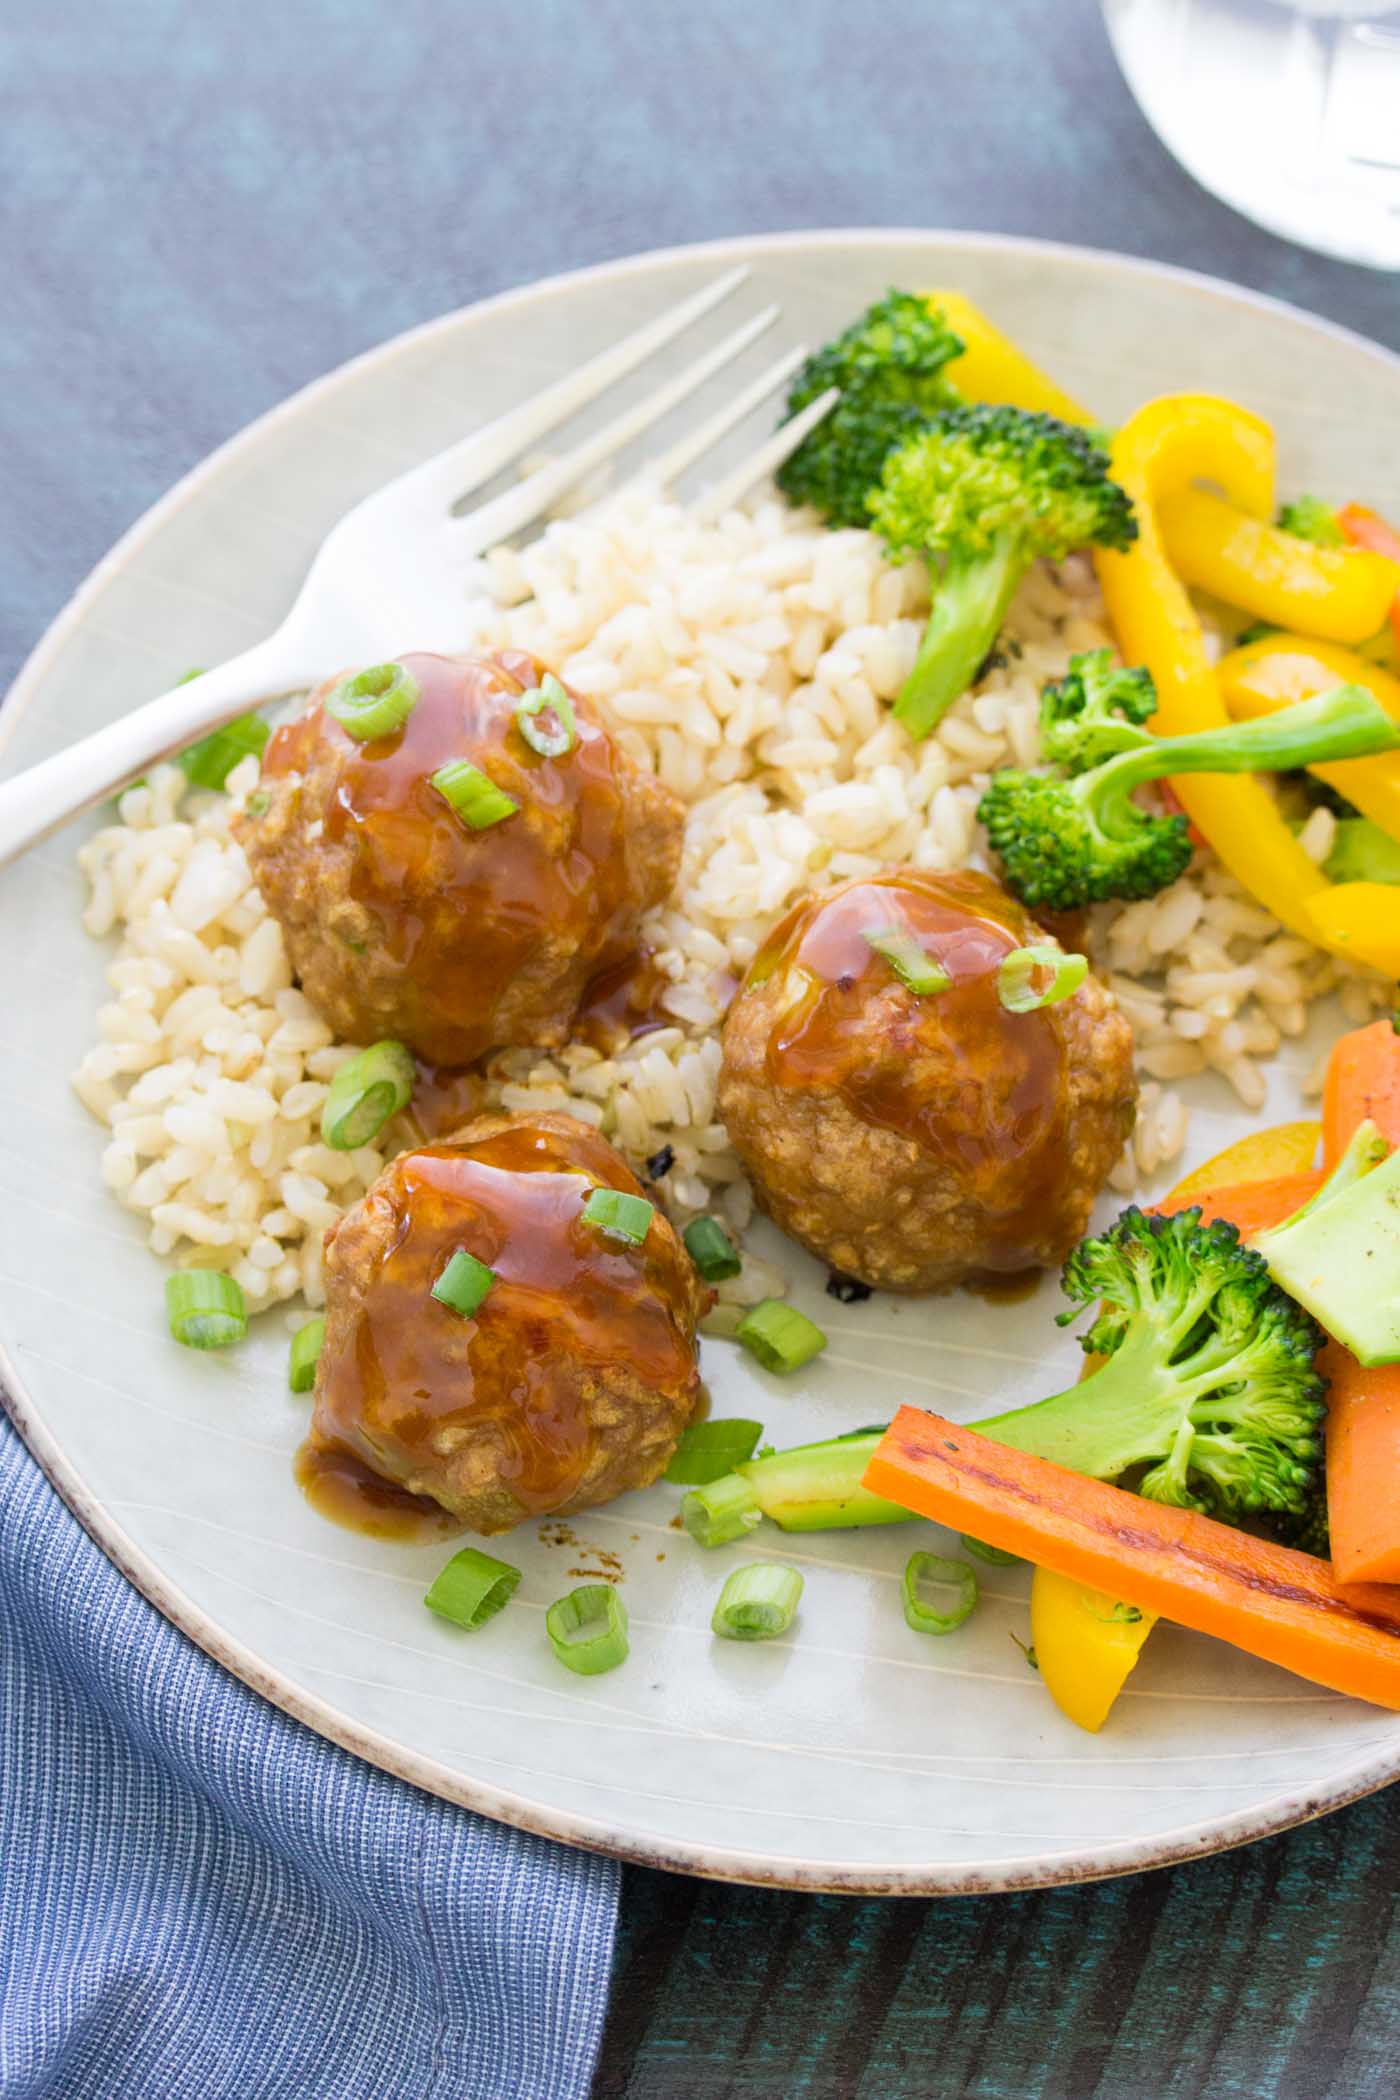 Three sweet and sour turkey meatballs served with brown rice and vegetables.